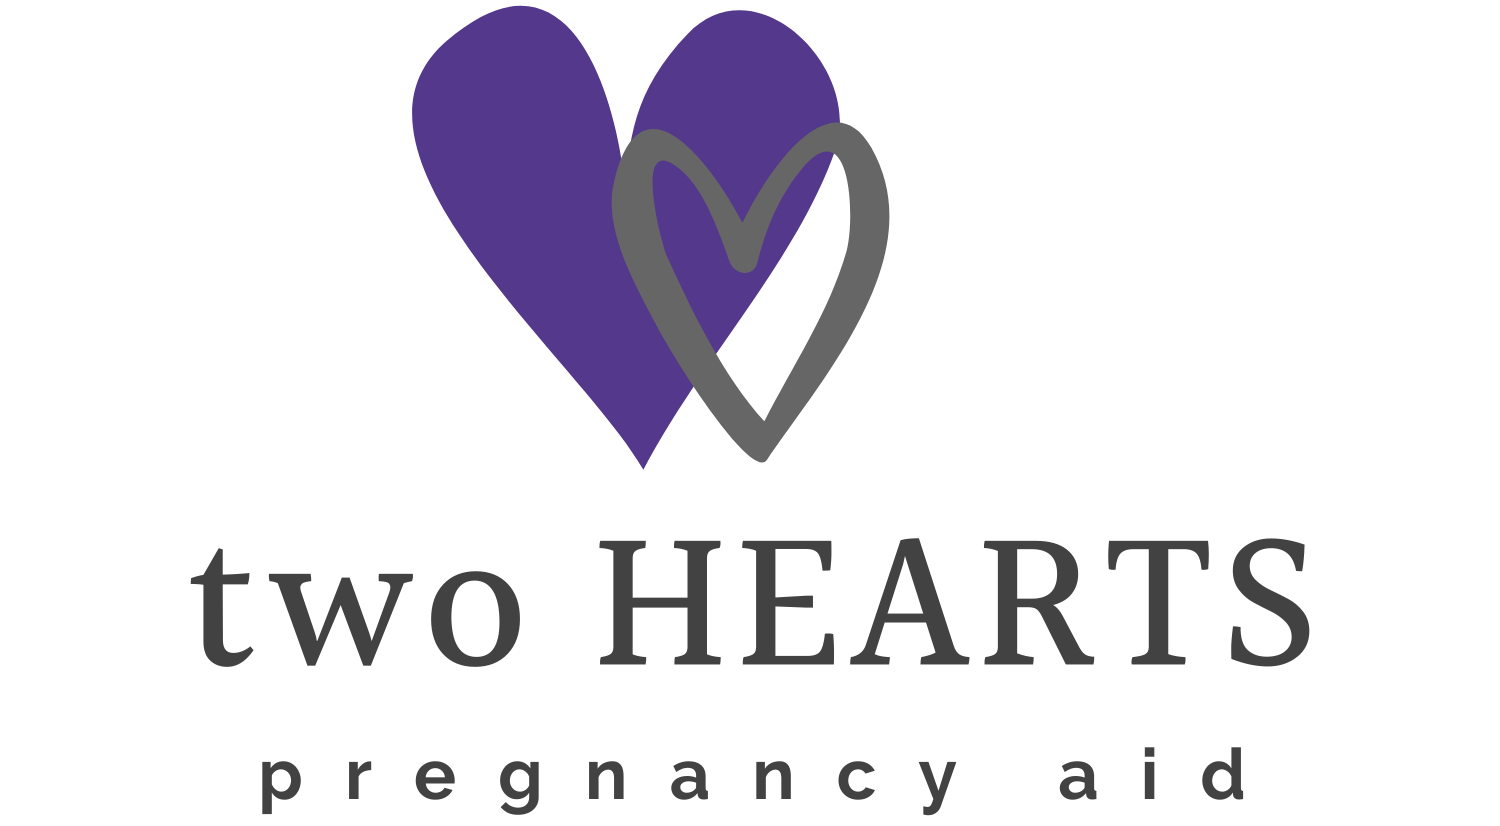 two HEARTS pregnancy aid